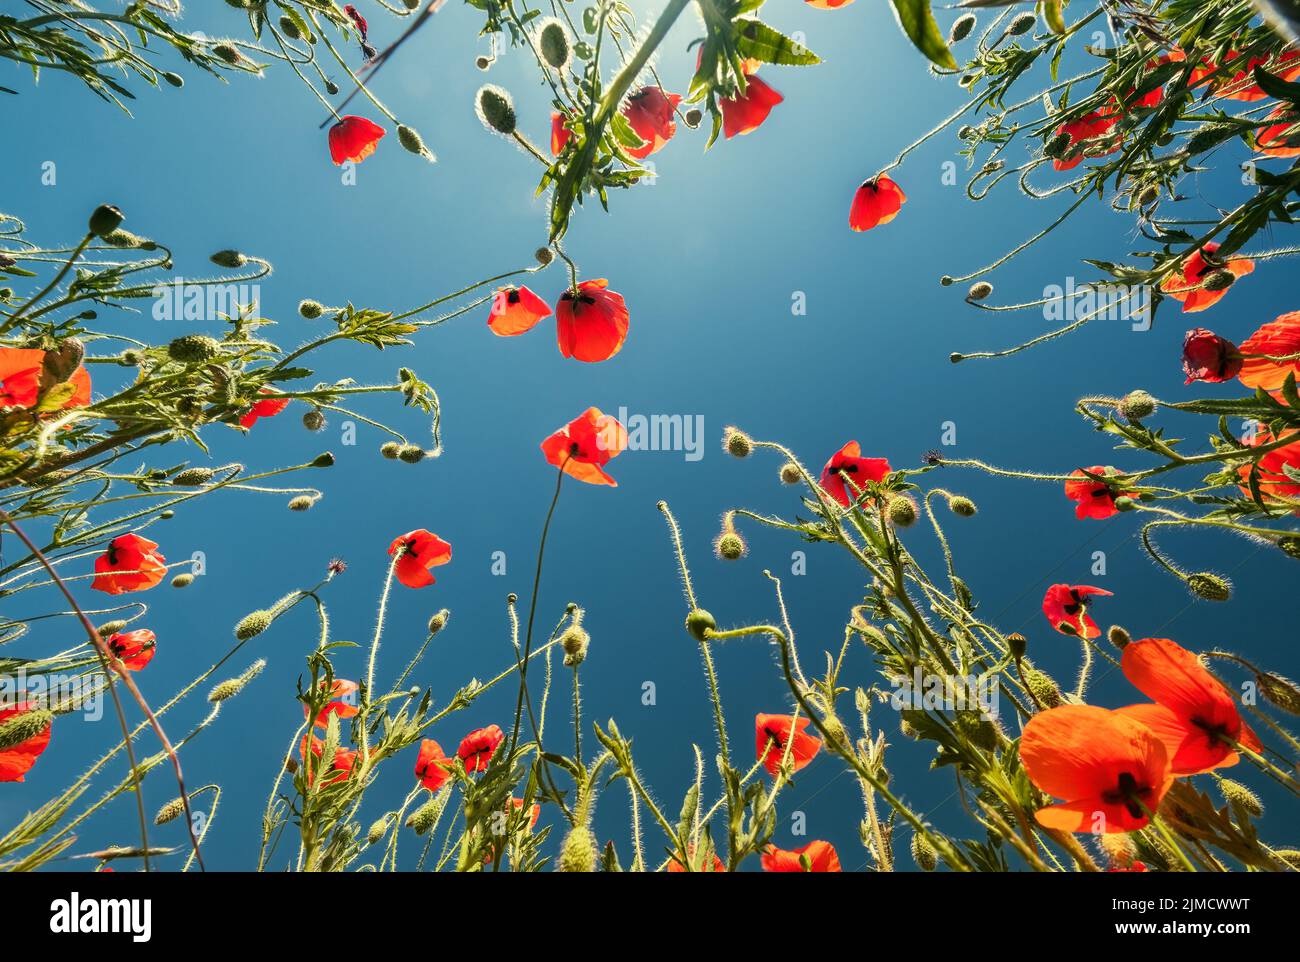 Bottom view of red poppies and blue sky Stock Photo